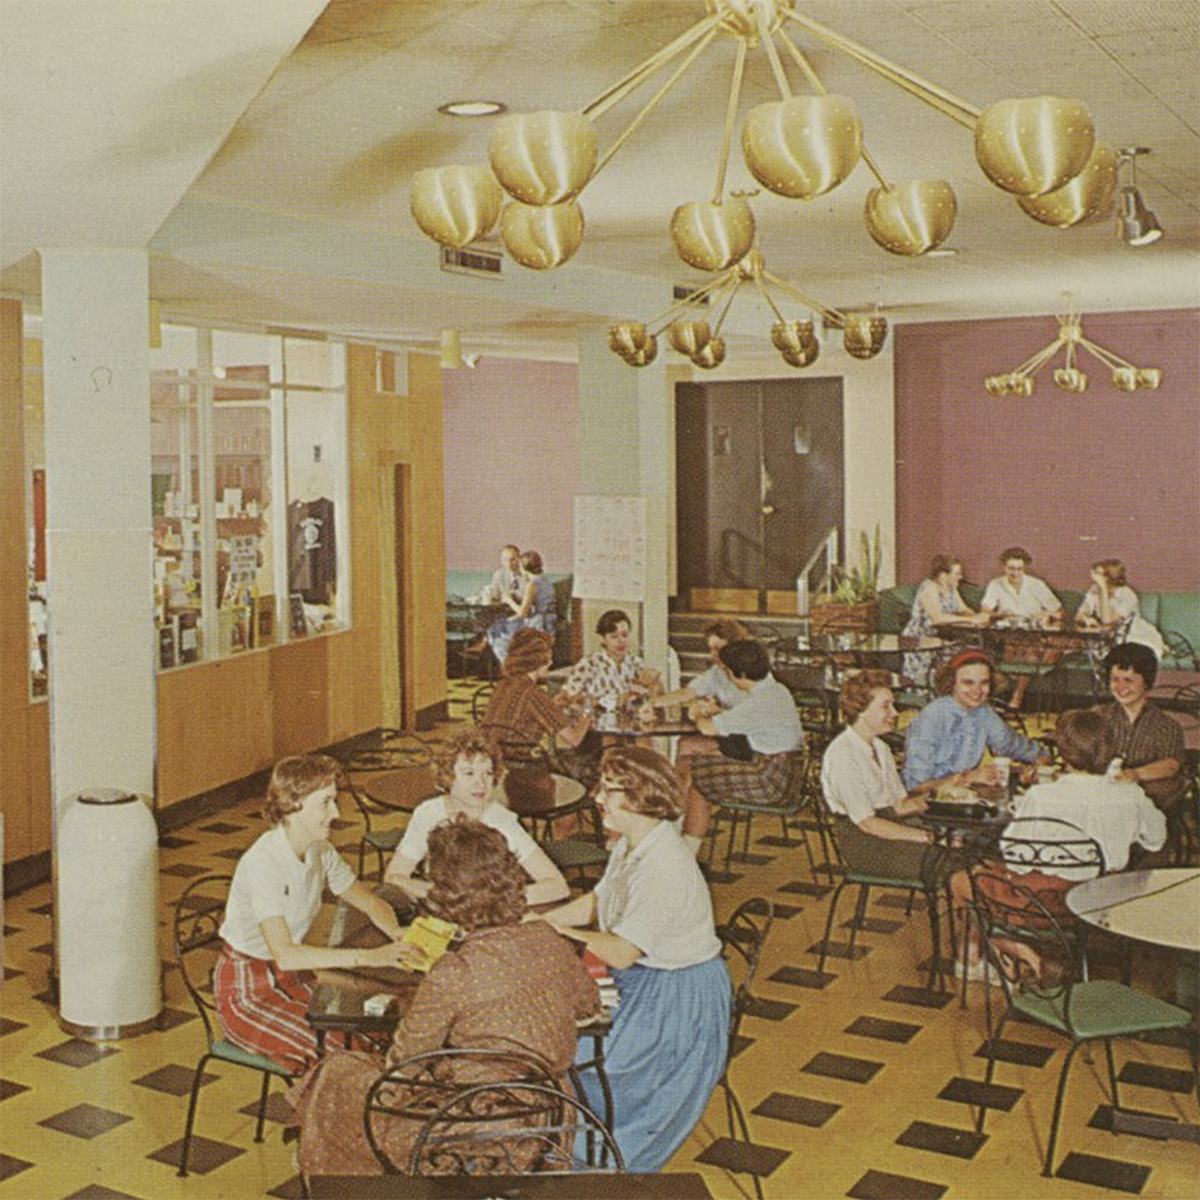 Vintage photograph of a dining hall on campus in the 1950s